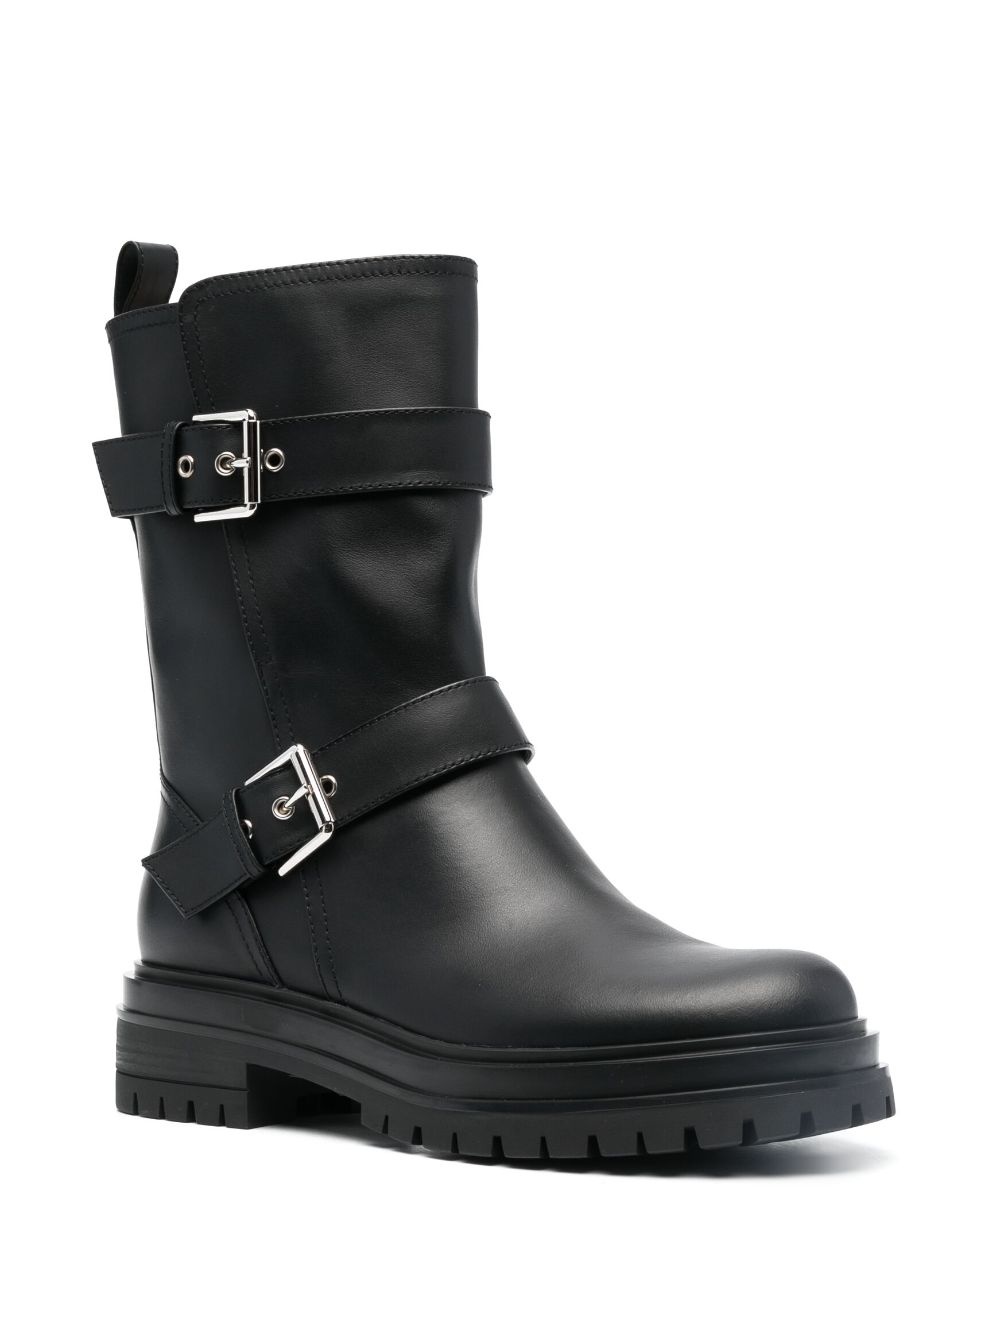 Amphibian buckled ankle boots - 2